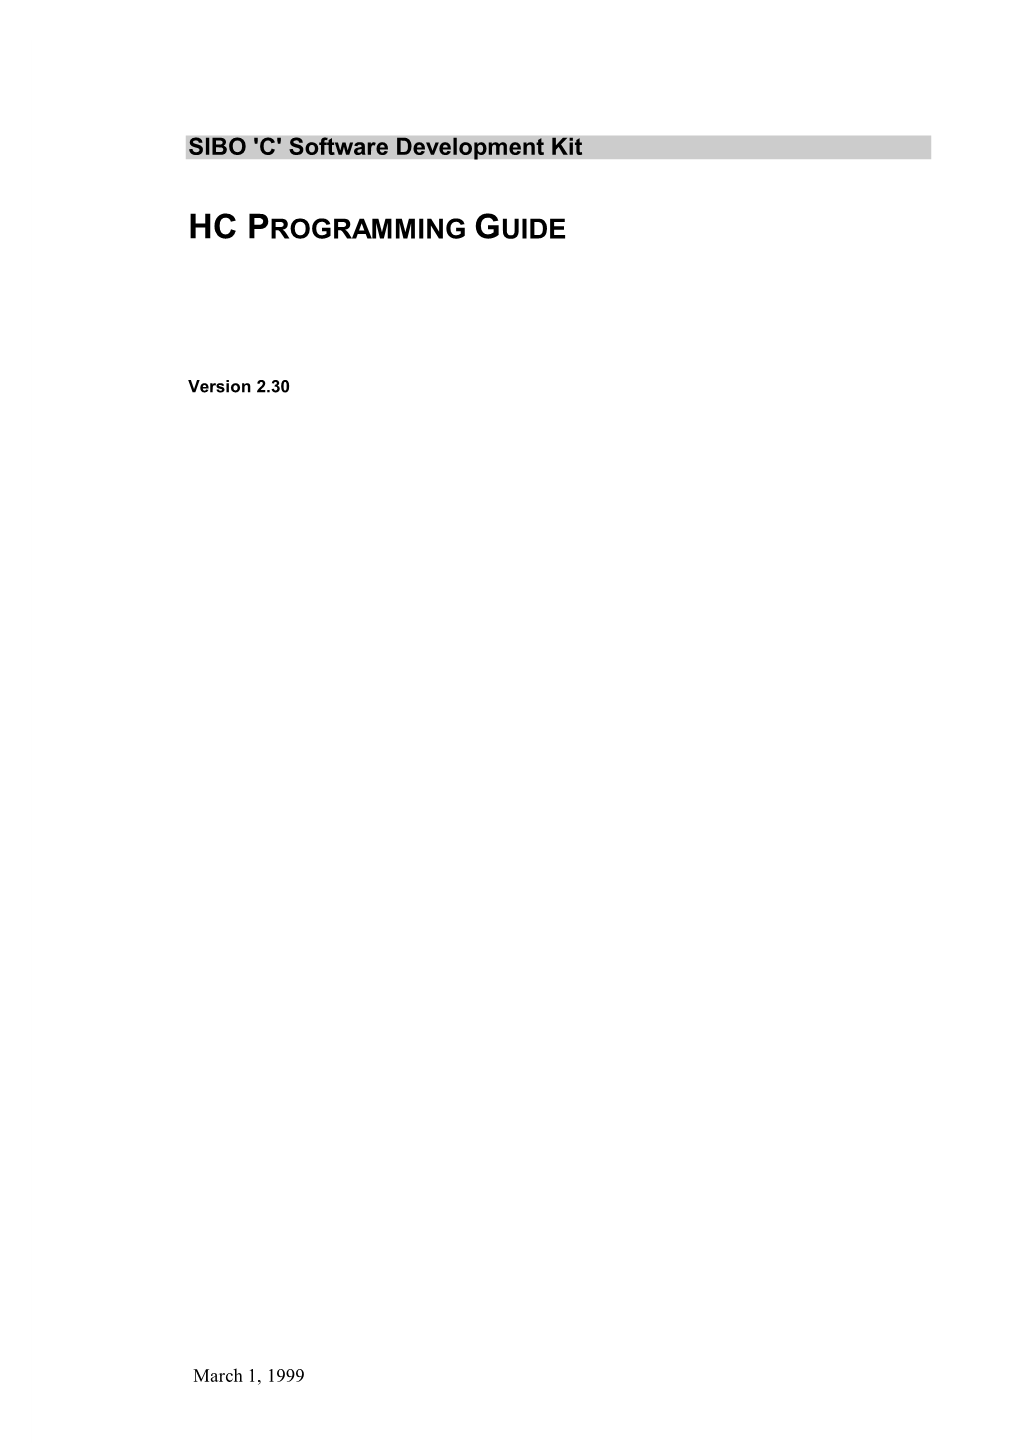 Psion HC Programming Guide